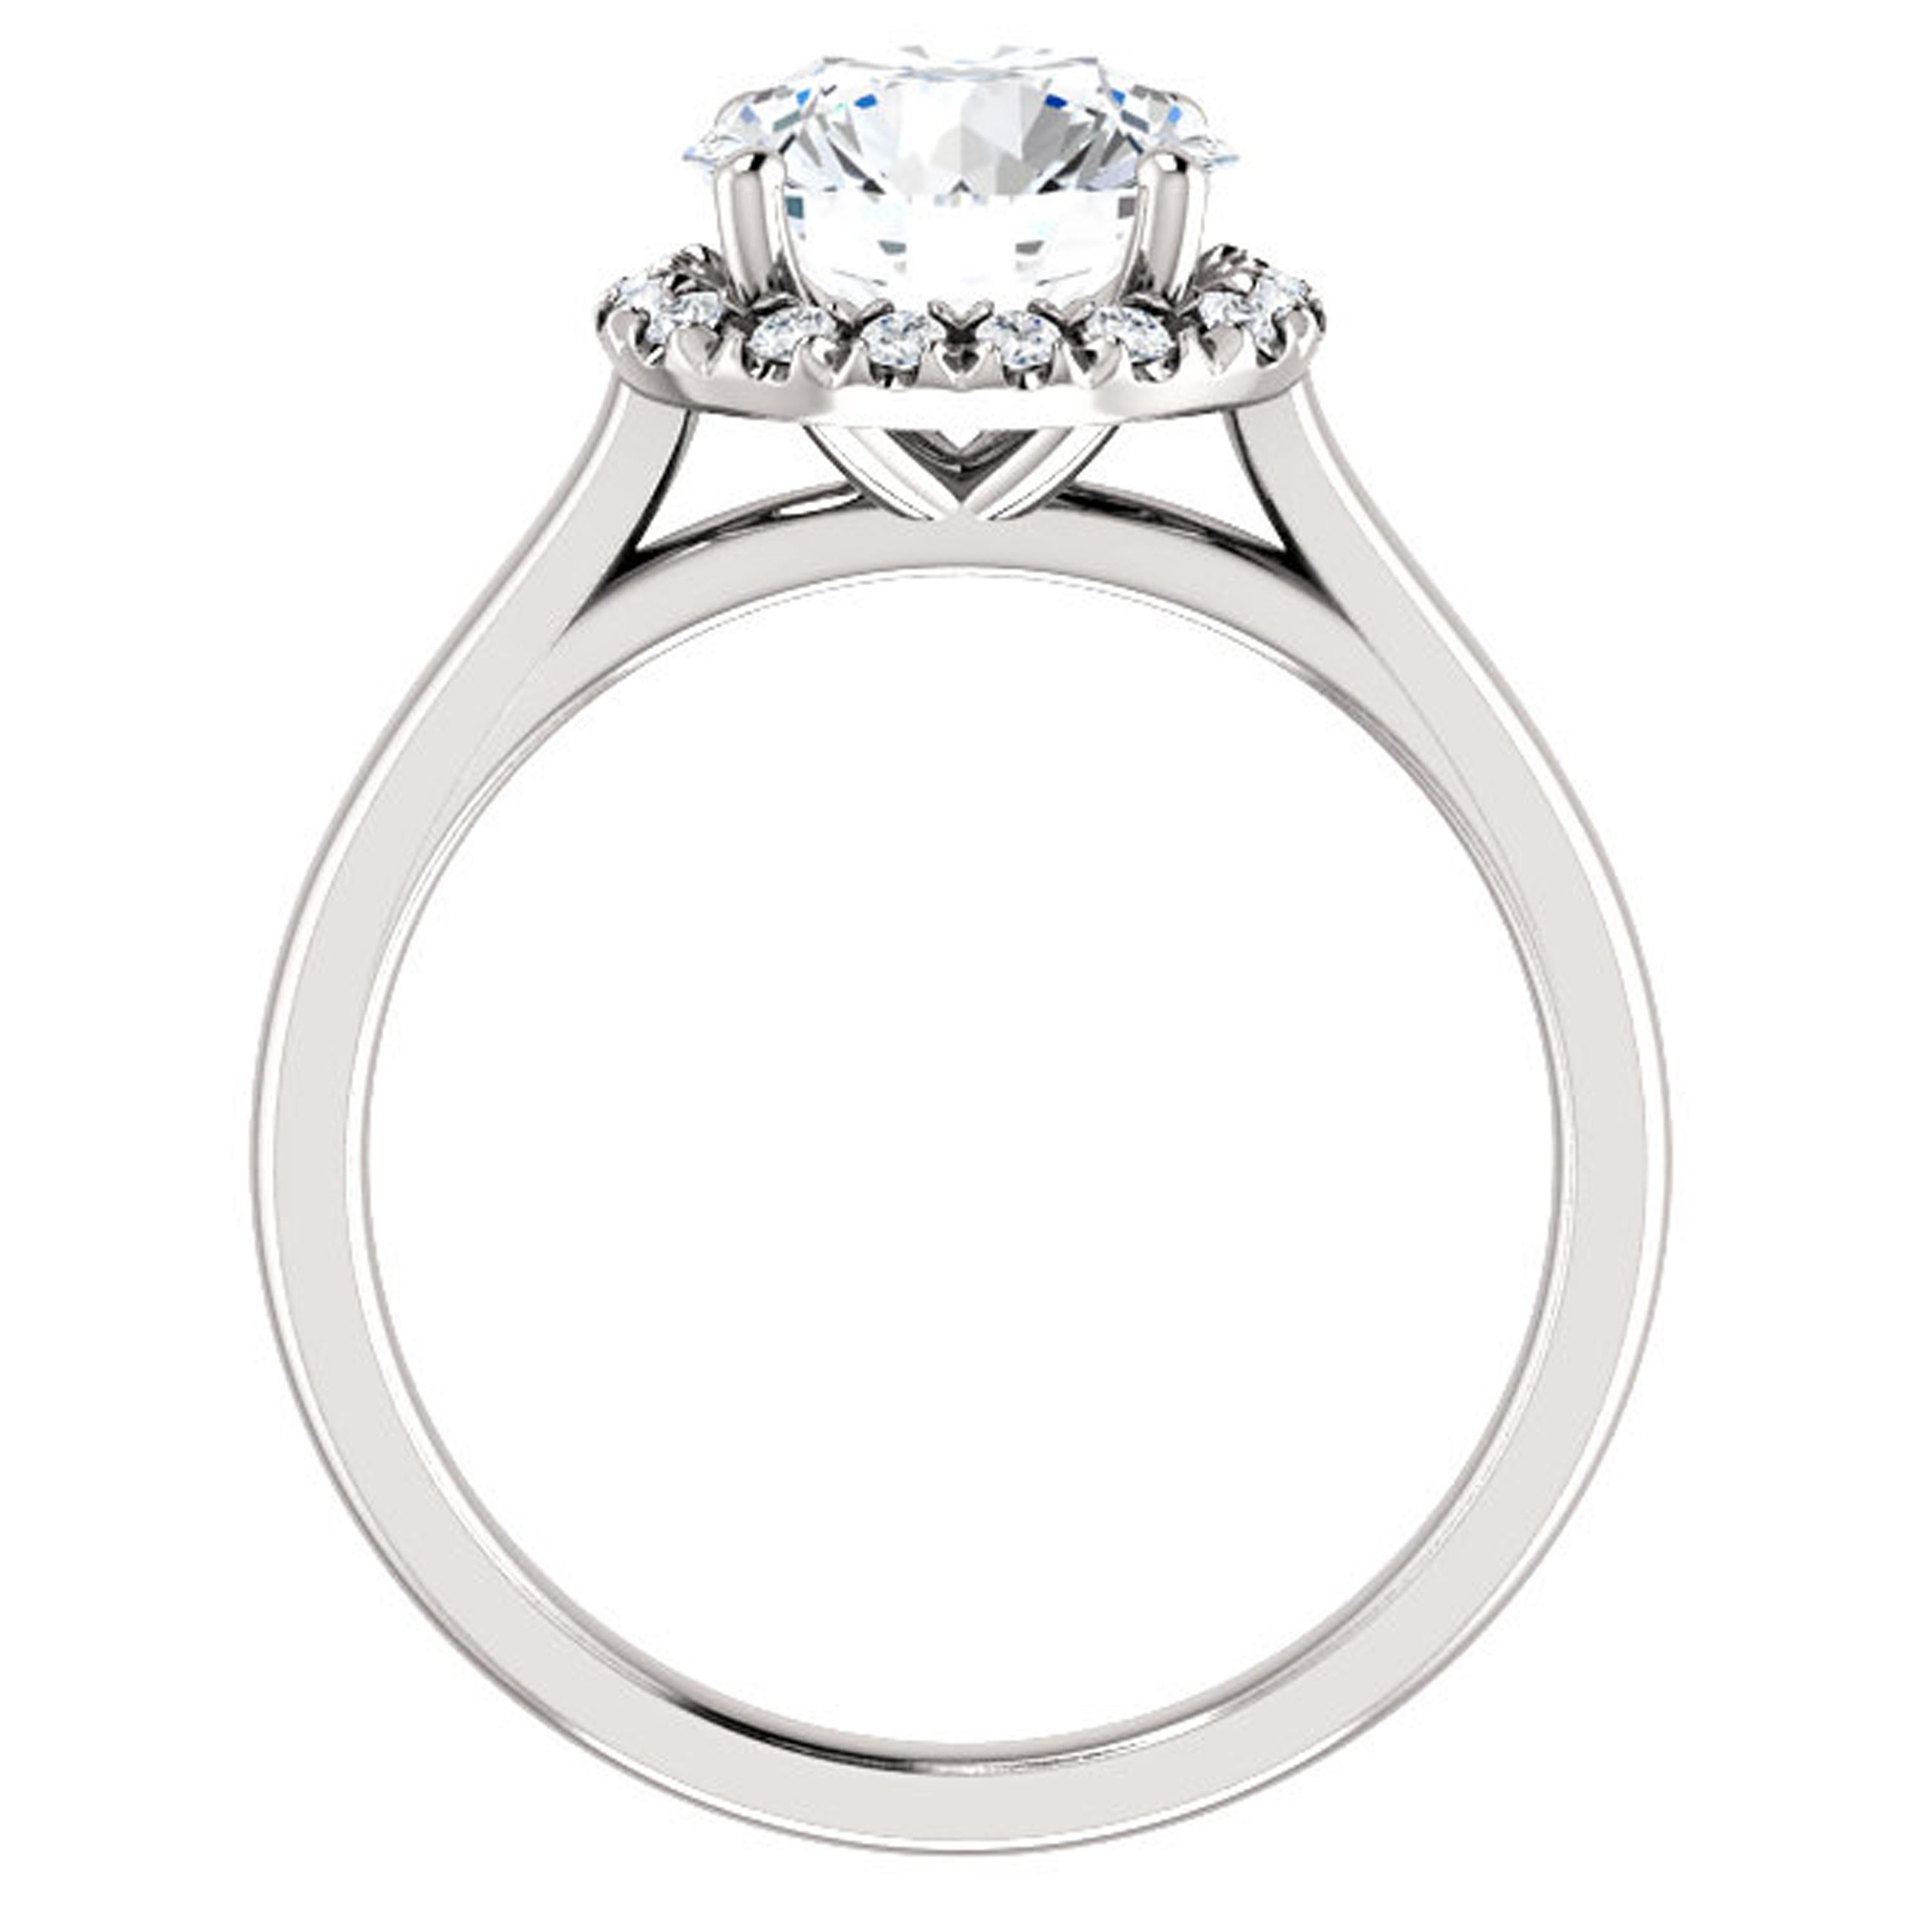 Lustrous white diamonds encircle the halo of this Valorenna plain shank style engagement ring. Simple yet unique, this engagement is the perfect way to propose to a classic minded lady.

Matching band sold separately.

Center Stone:
1 Round-cut